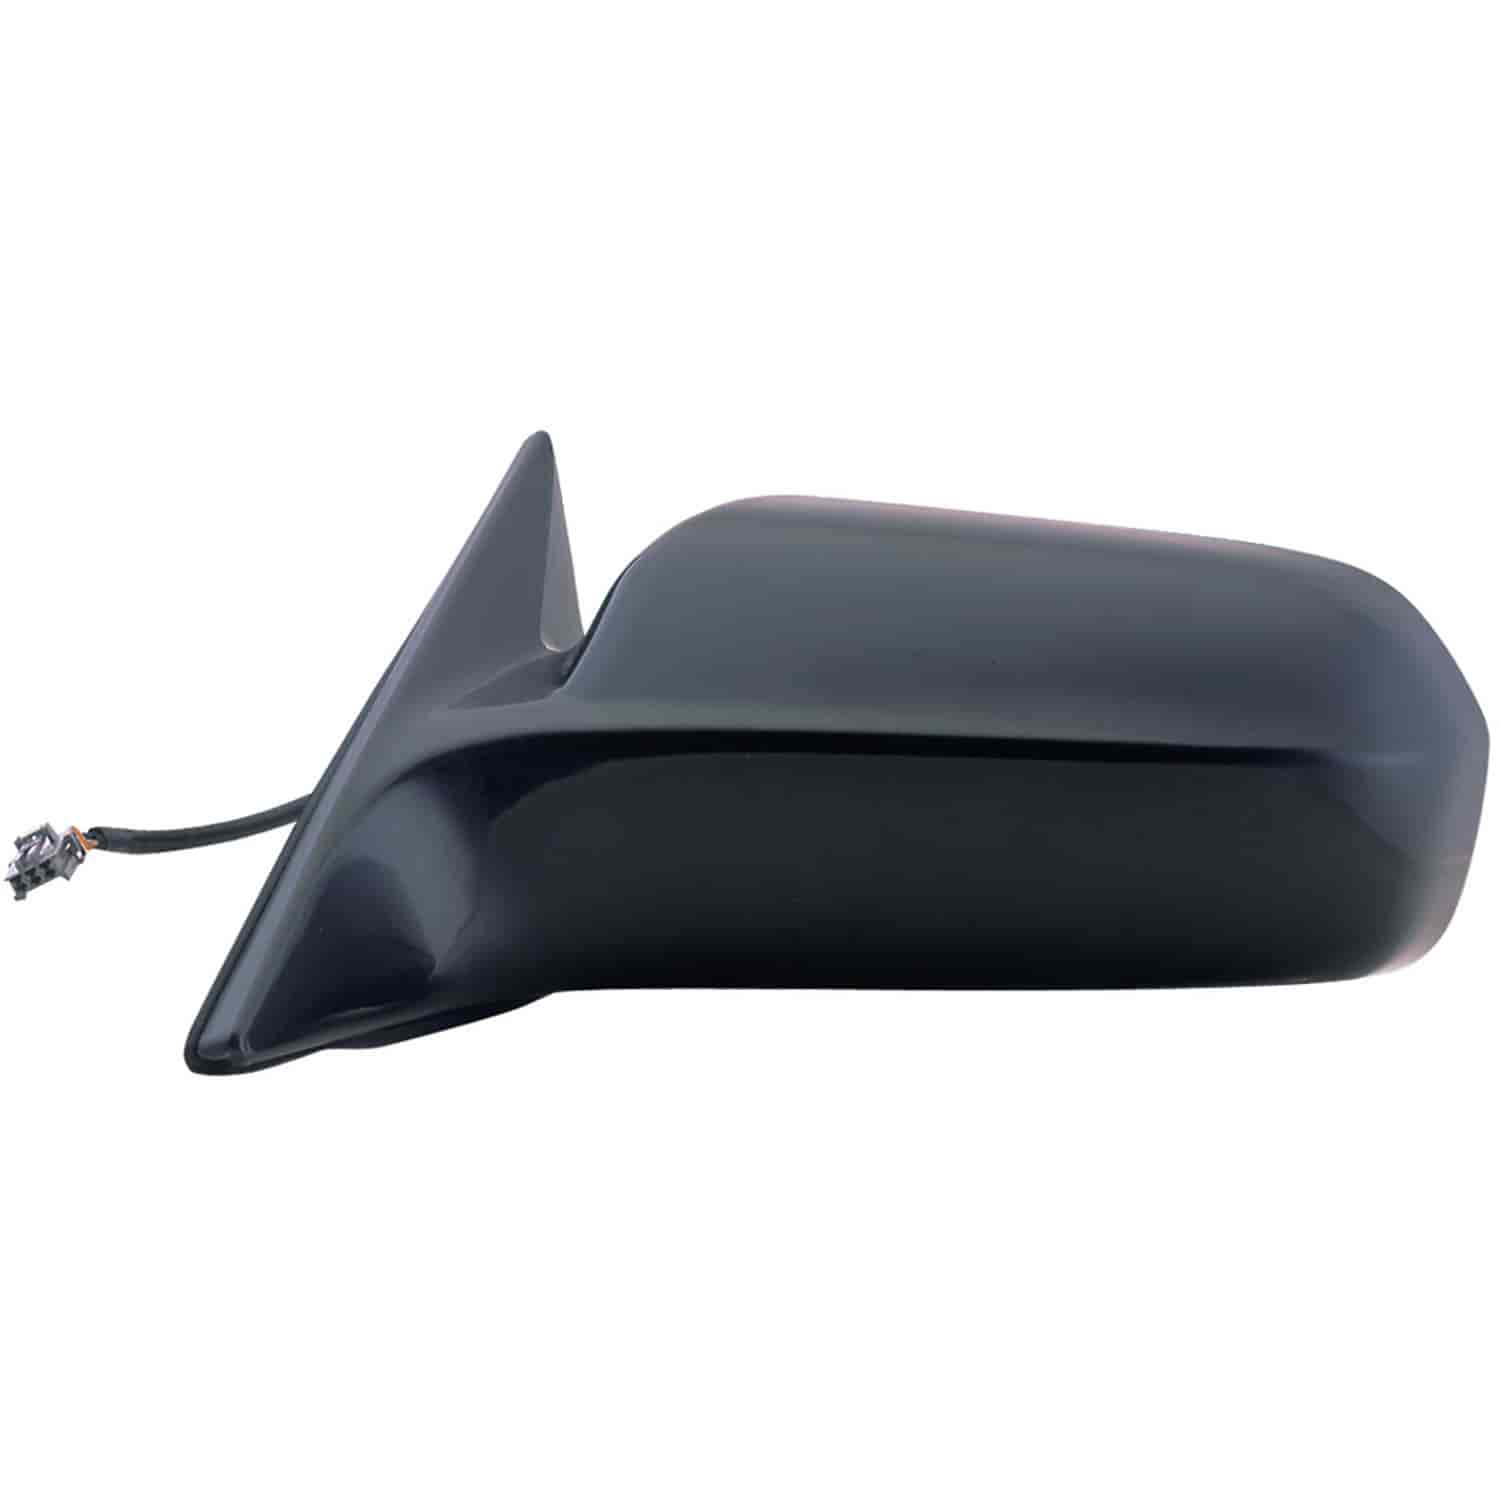 OEM Style Replacement mirror for 98 Honda Accord